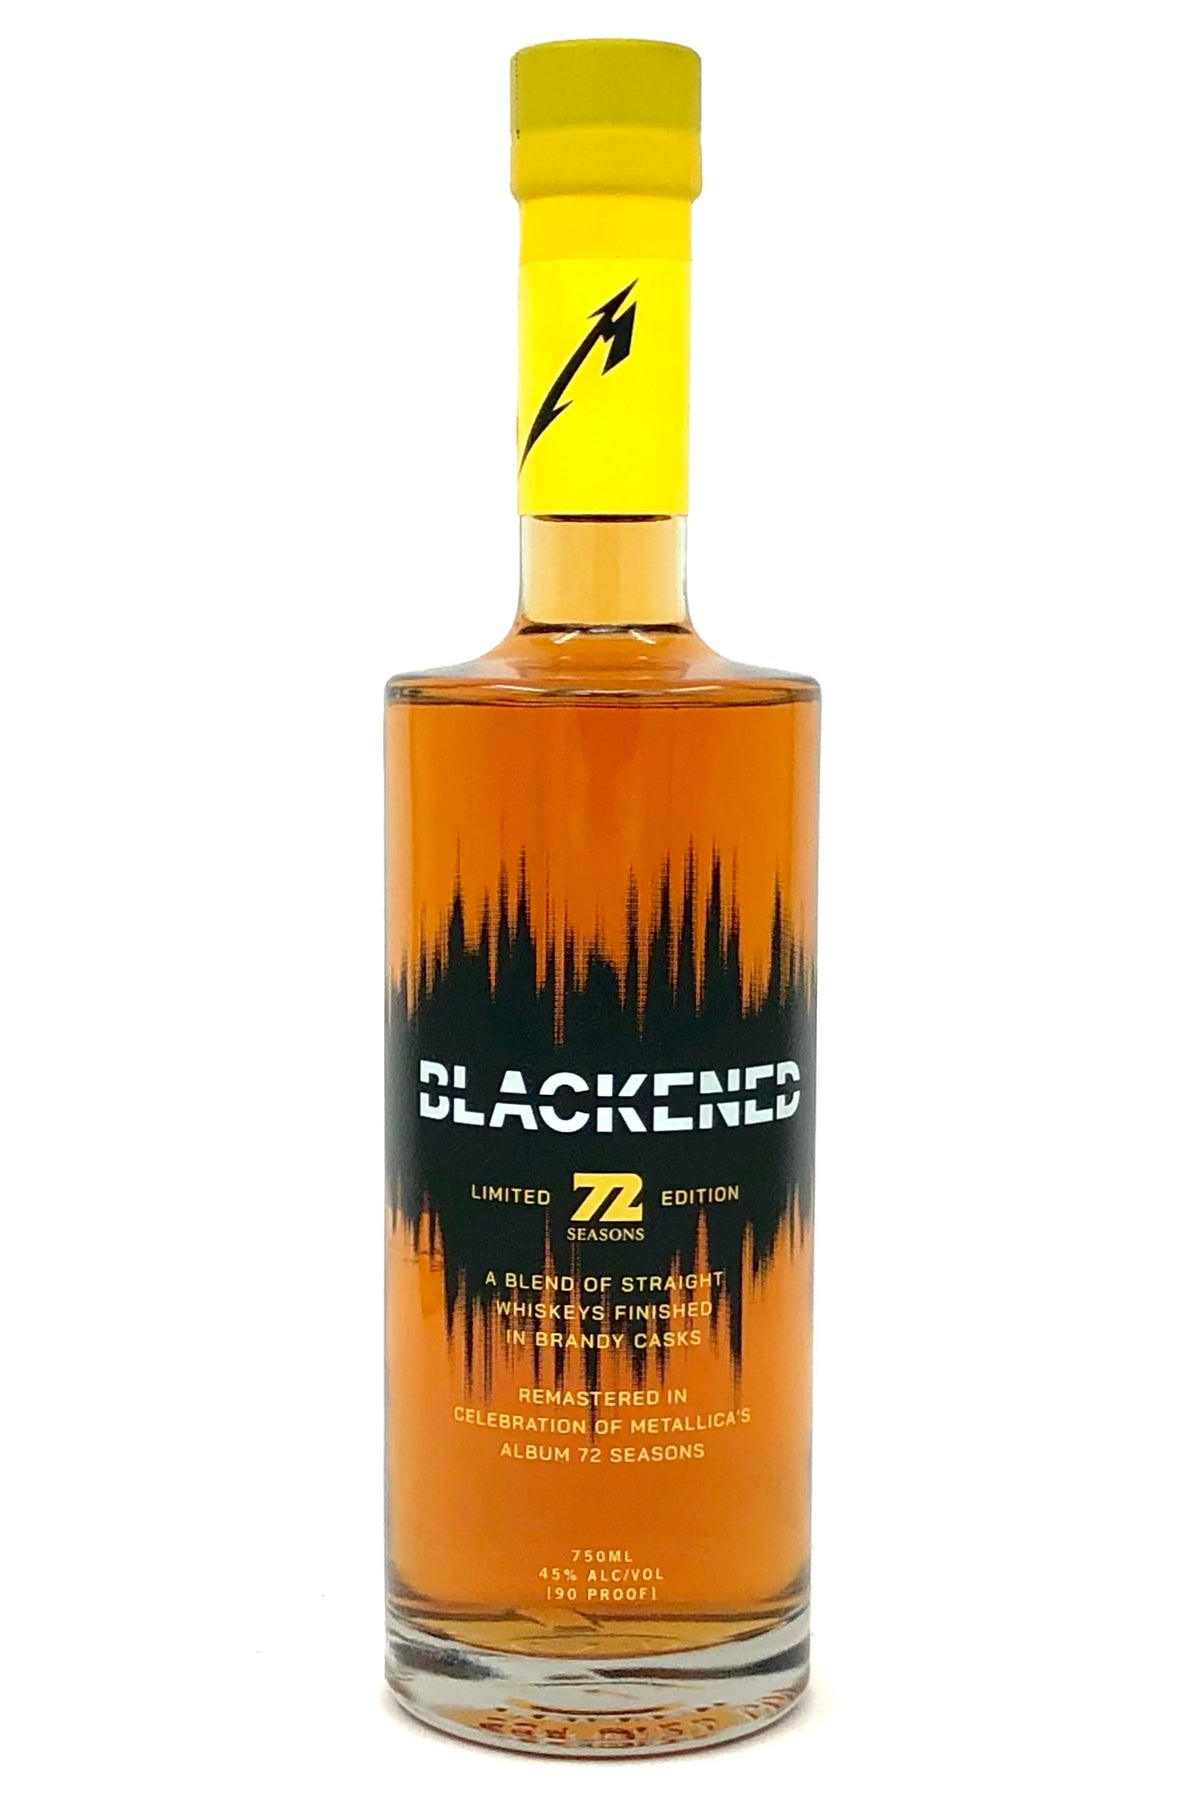 Blackened &quot;72 Seasons Limited Edition&quot; Whiskey